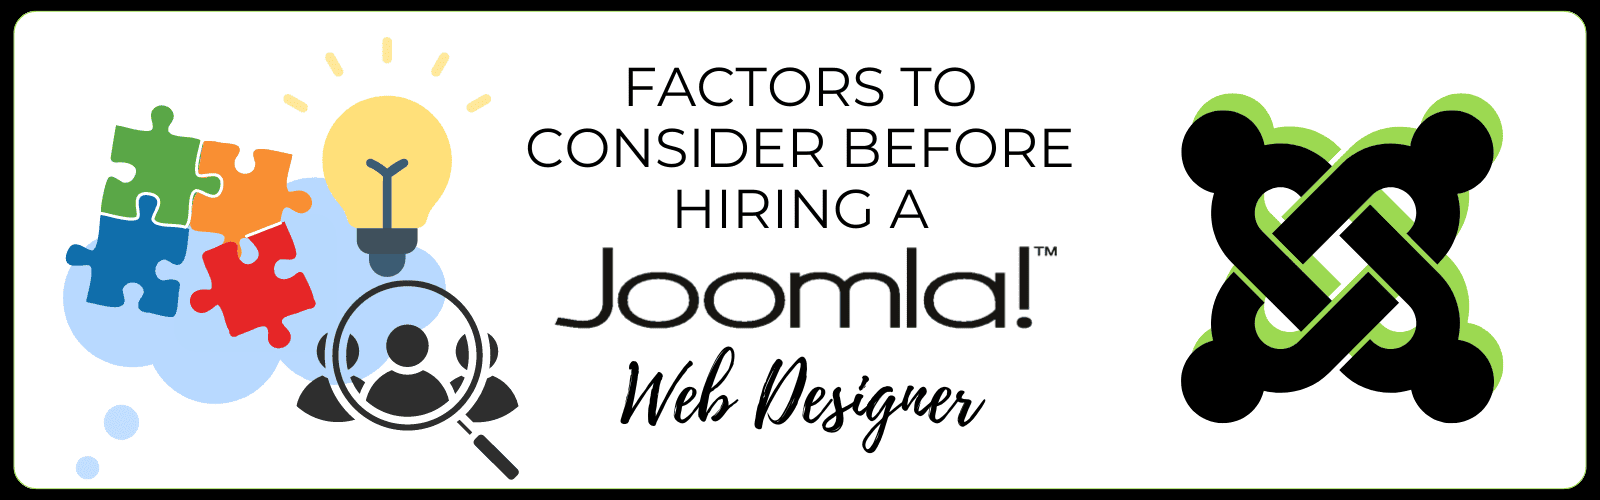 Joomla web designers offer a wide range of services to meet your website design needs. Here are some of the key services you can expect from a Joomla web designer:  Website Design and Development: A Joomla web designer will create a visually appealing and user-friendly website using the Joomla platform. They will ensure that your website is responsive and mobile-friendly, accessible on all devices.  Customization: Joomla web designers can customize your website to fit your unique business requirements. They can integrate third-party extensions and plugins to enhance the functionality of your website.  Ongoing Support and Maintenance: Once your website is live, a Joomla web designer will provide ongoing support and maintenance. They will ensure that your website runs smoothly, perform regular updates, and address any technical issues that may arise.  BONUS - SEO Optimization and Marketing: At Geoffresh SEO Web Design also offers SEO optimization and marketing services. We build all of our websites with SEO in mind and will optimize your website for search engines, helping you rank higher in search results and drive organic traffic to your site.  Factors to Consider Before Hiring a Joomla Web Designer